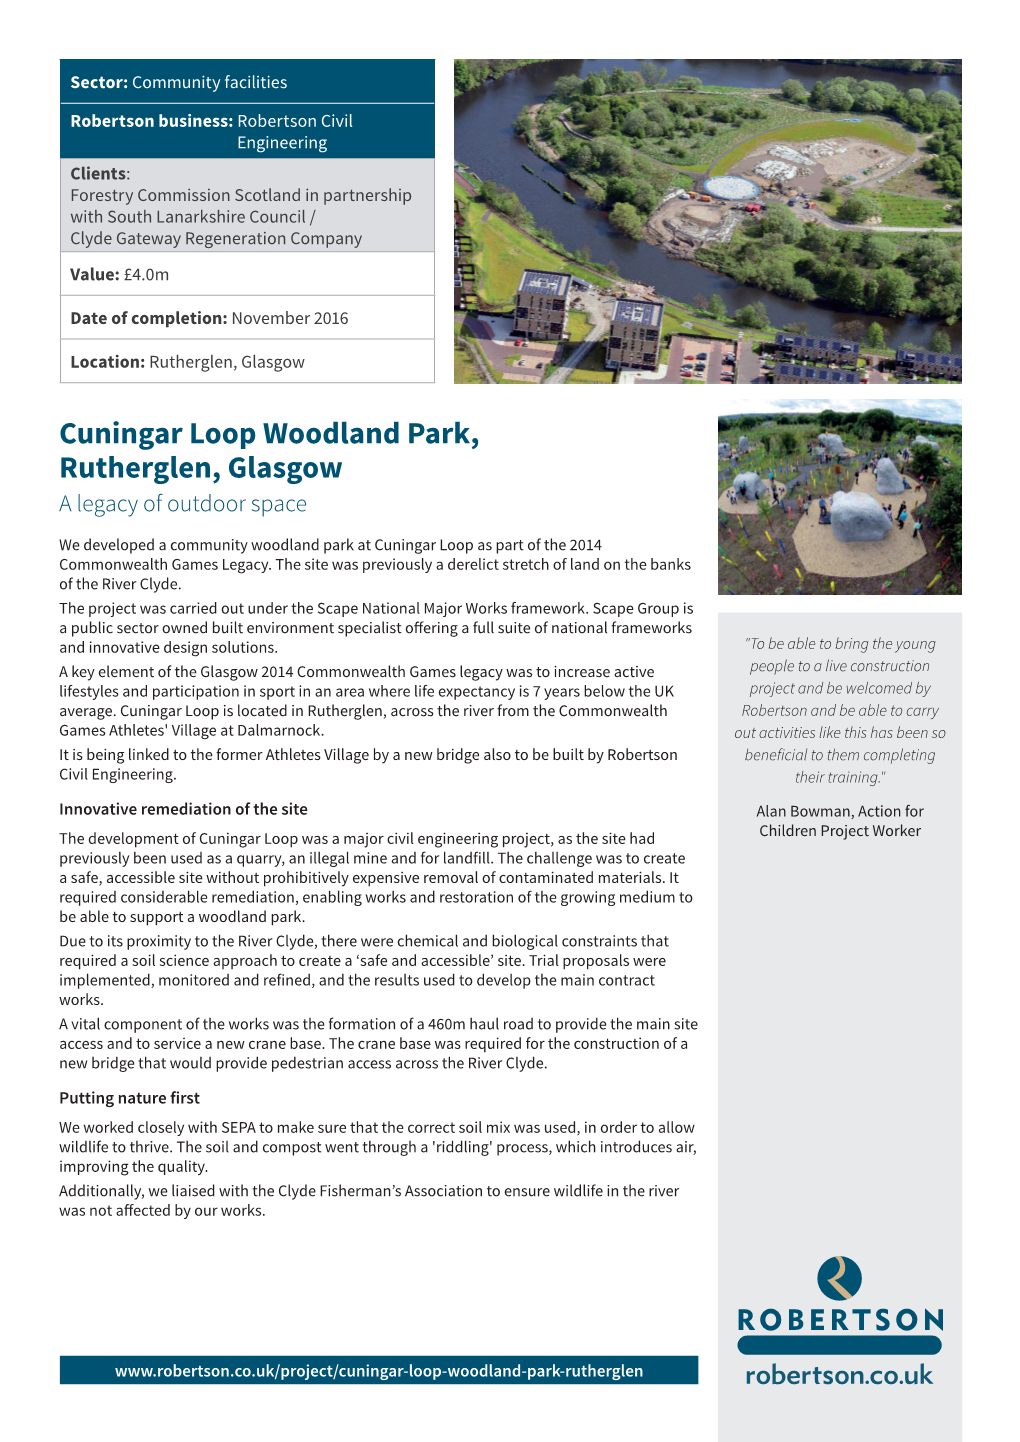 Cuningar Loop Woodland Park, Rutherglen, Glasgow a Legacy of Outdoor Space